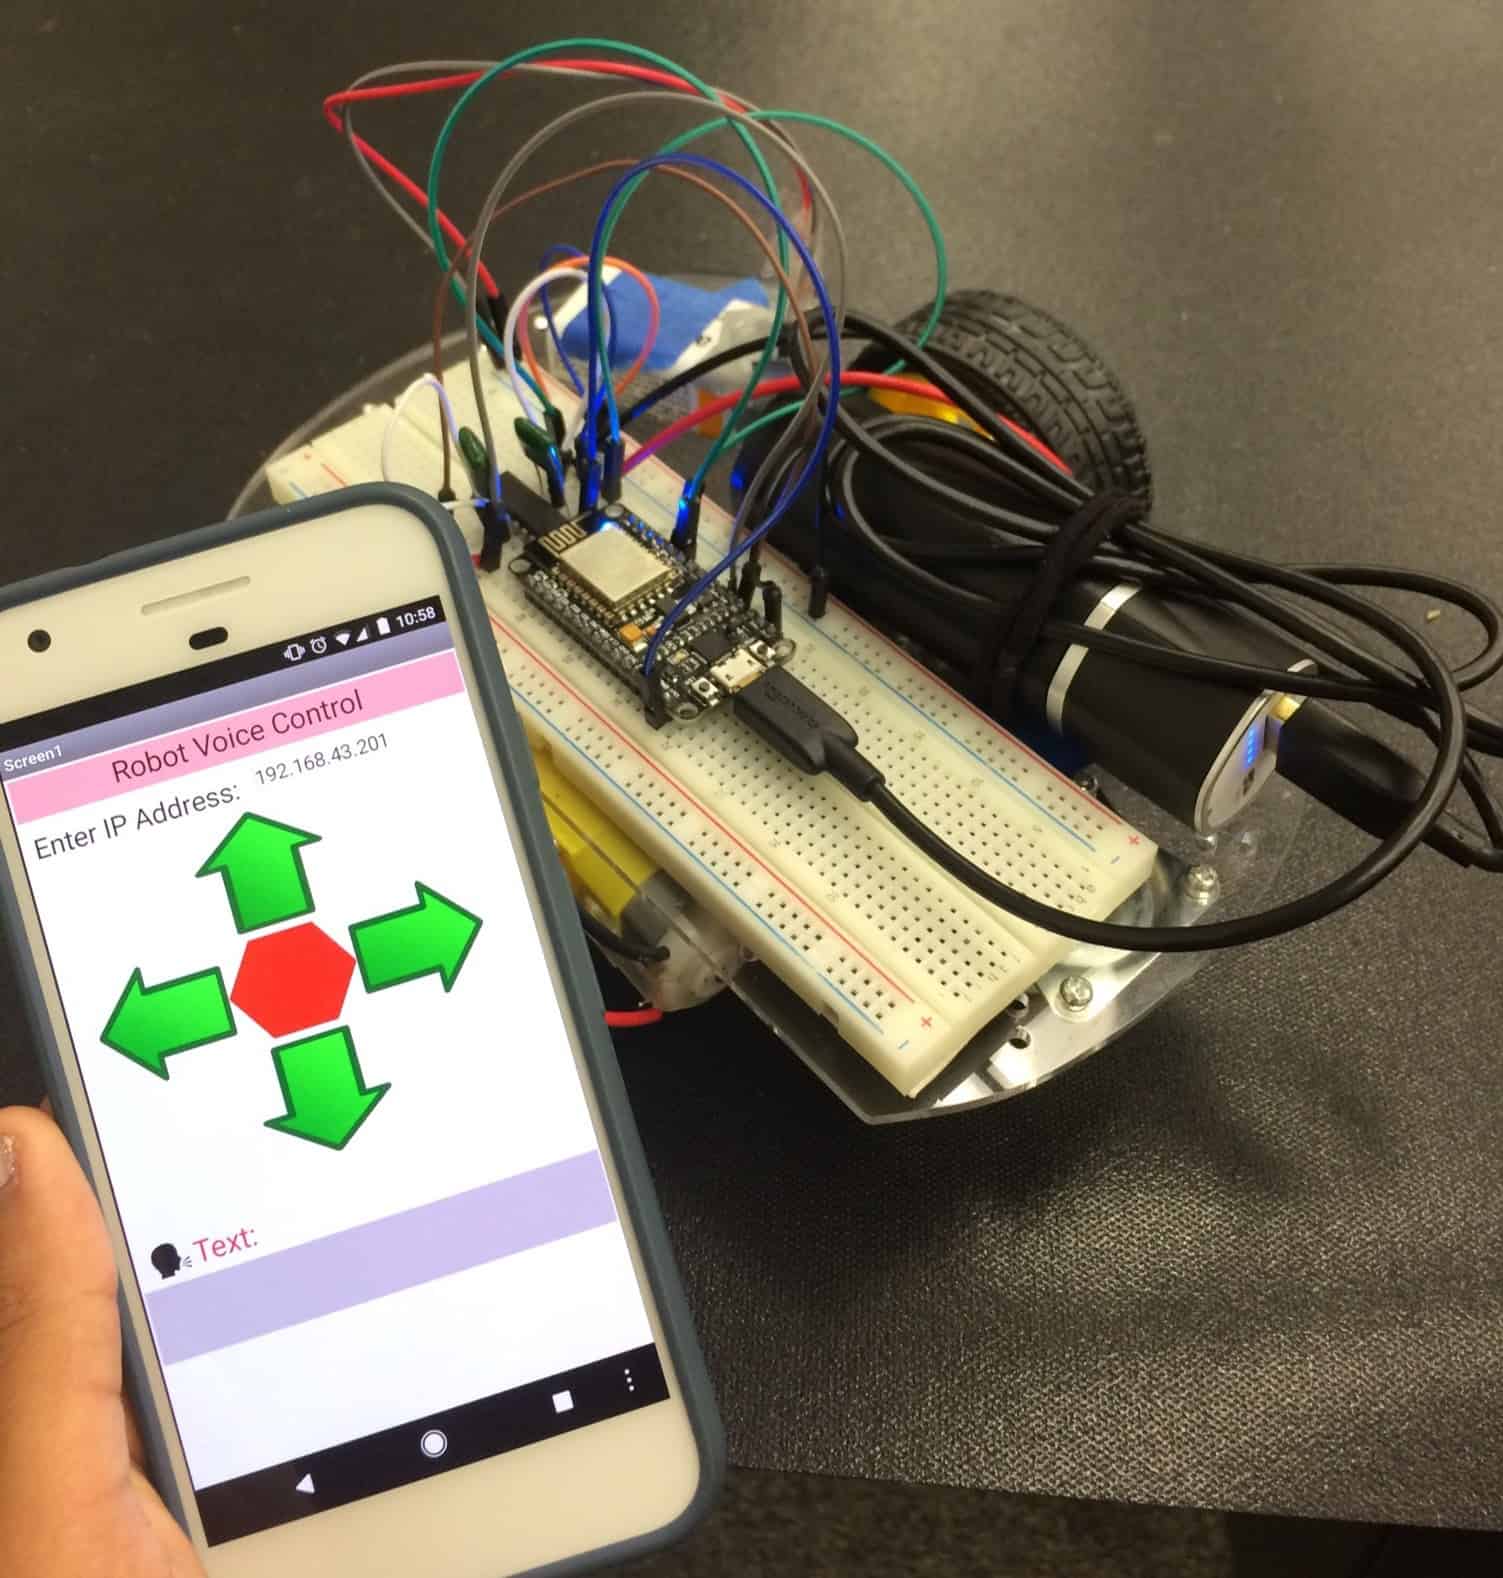 Robot being controlled with Android app